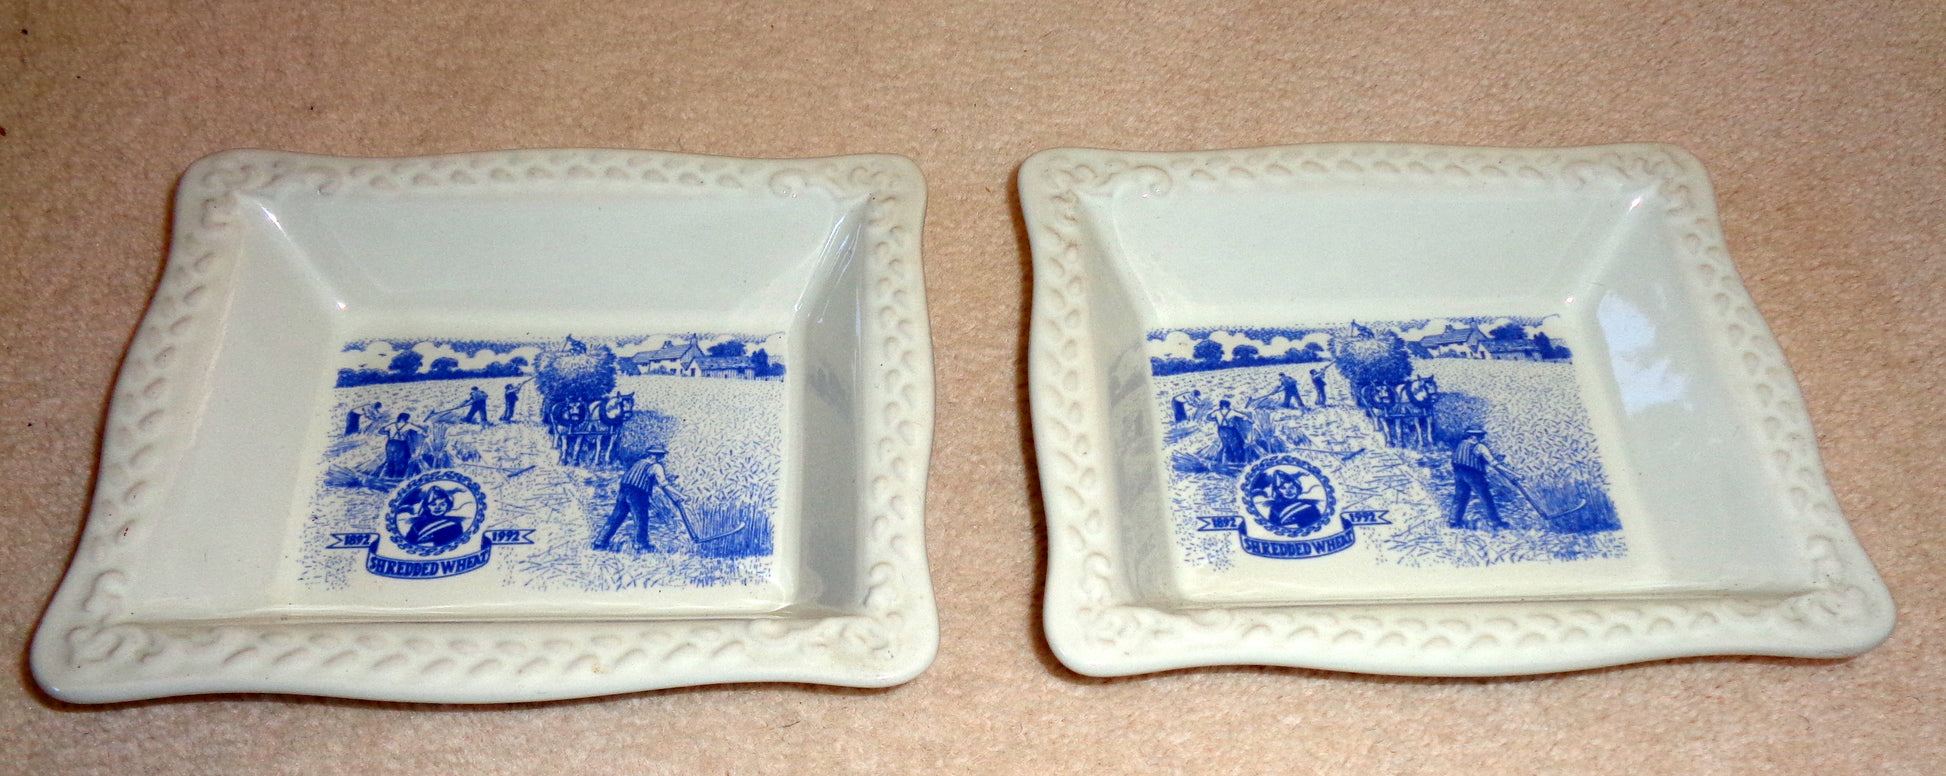 Pair Of Shredded Wheat Bowls Commemorating The Cereal's Centenary